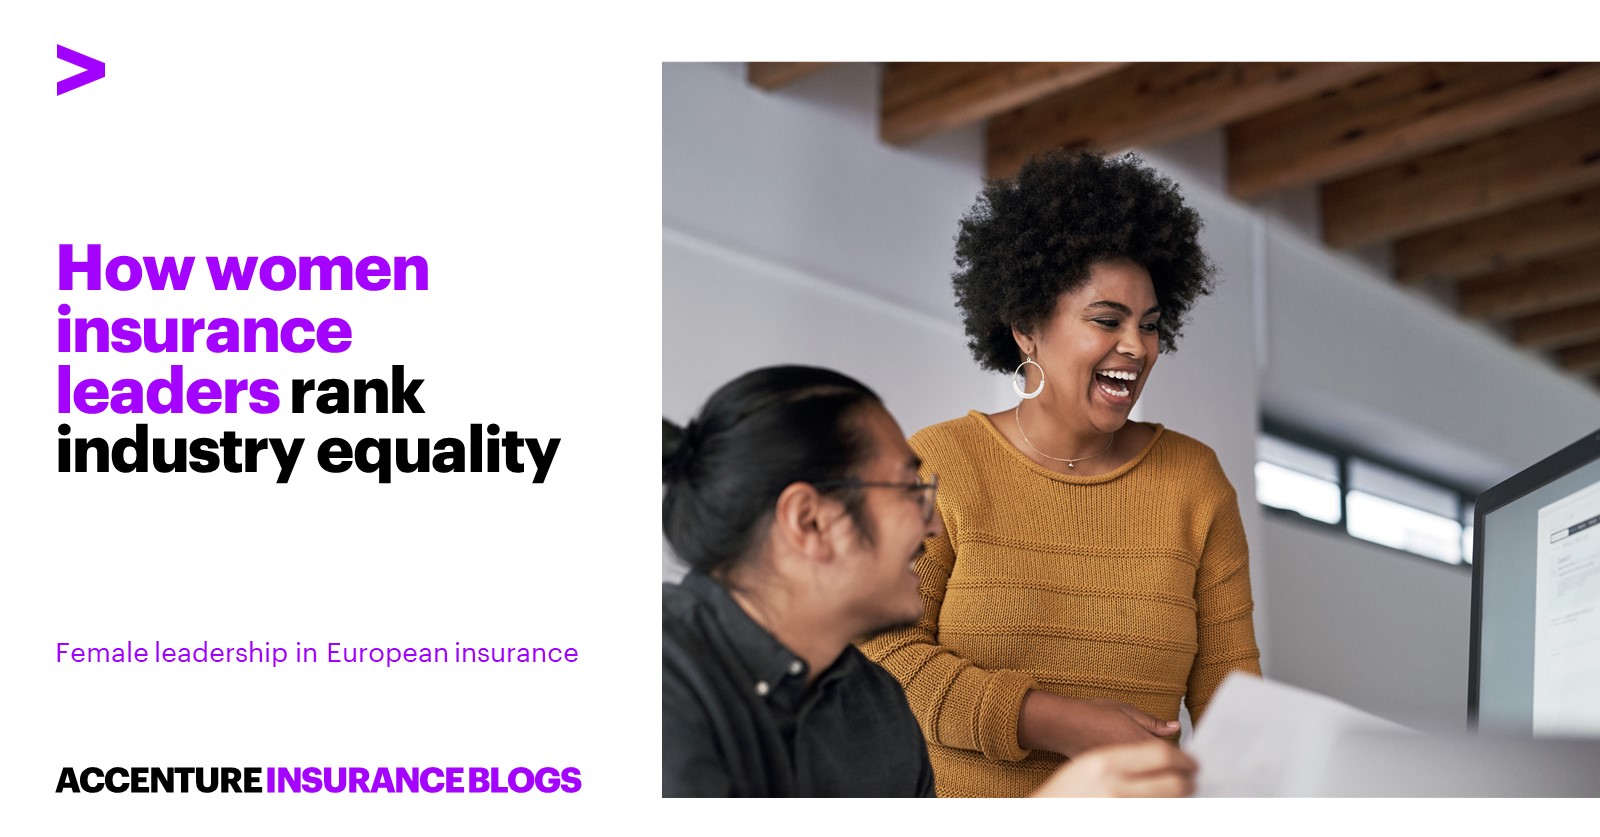 How feminine leaders in insurance coverage rank equality within the business